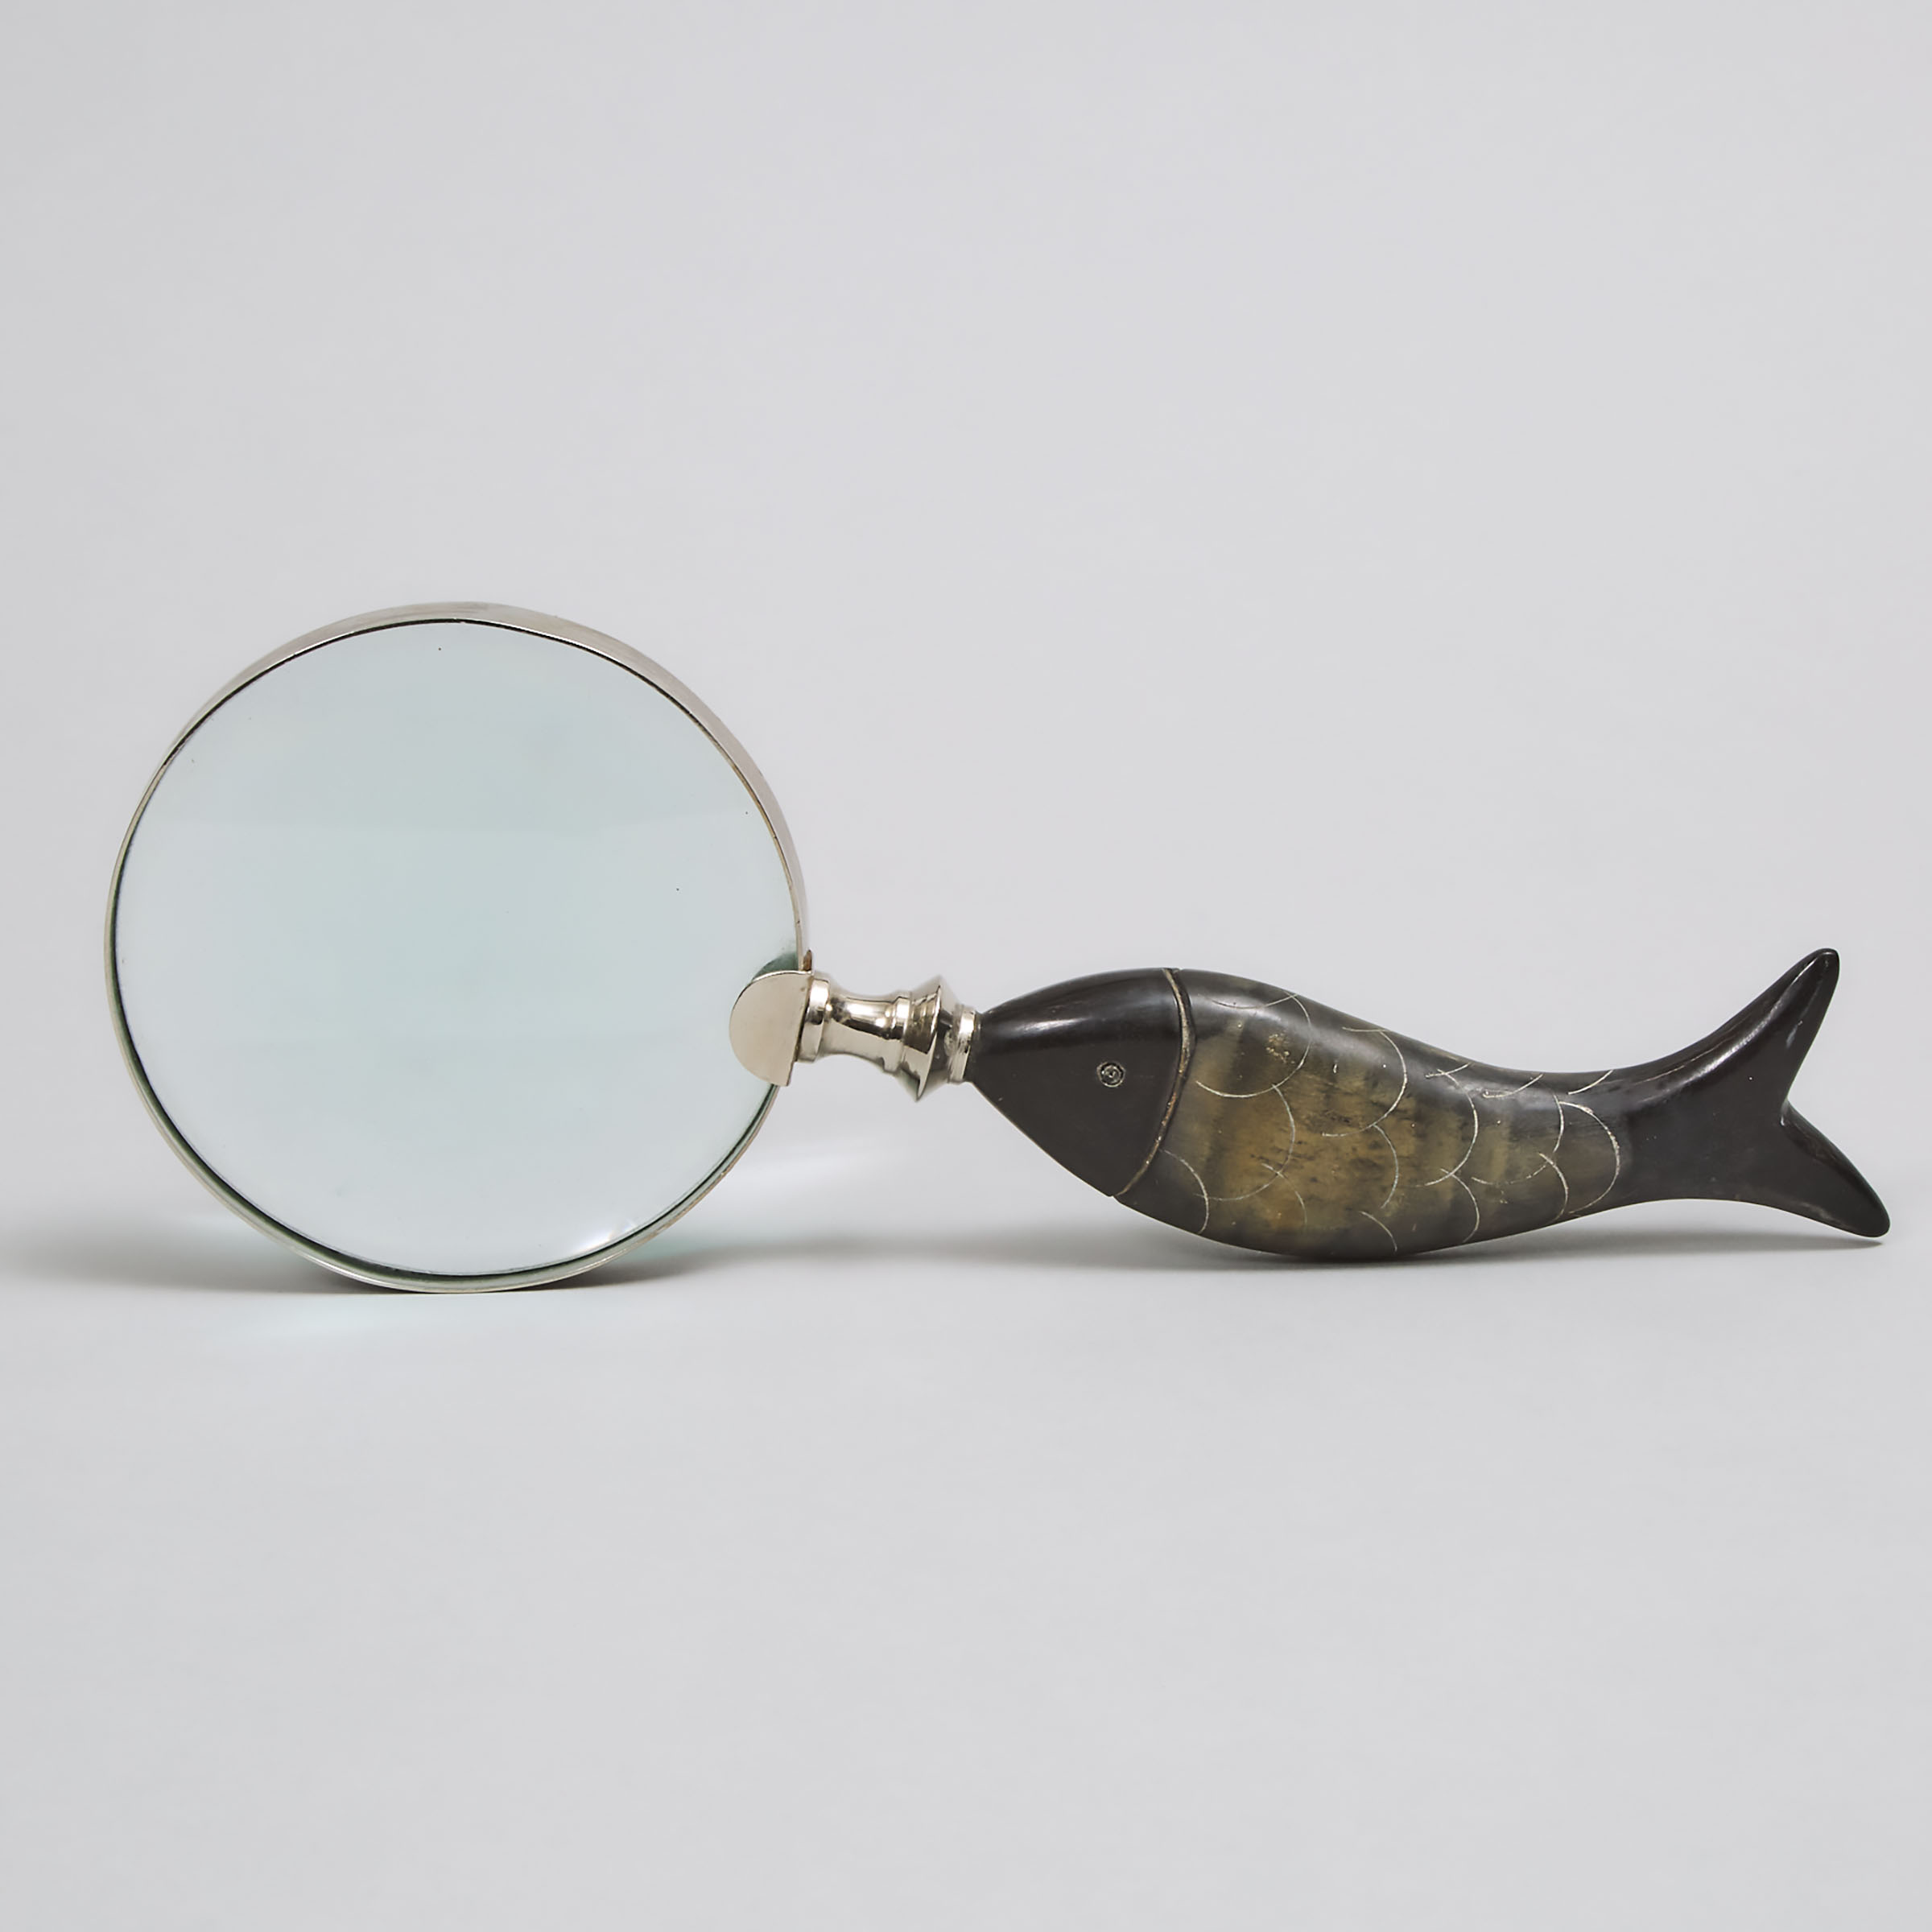 Horn Mounted Magnifying Glass, 20th century